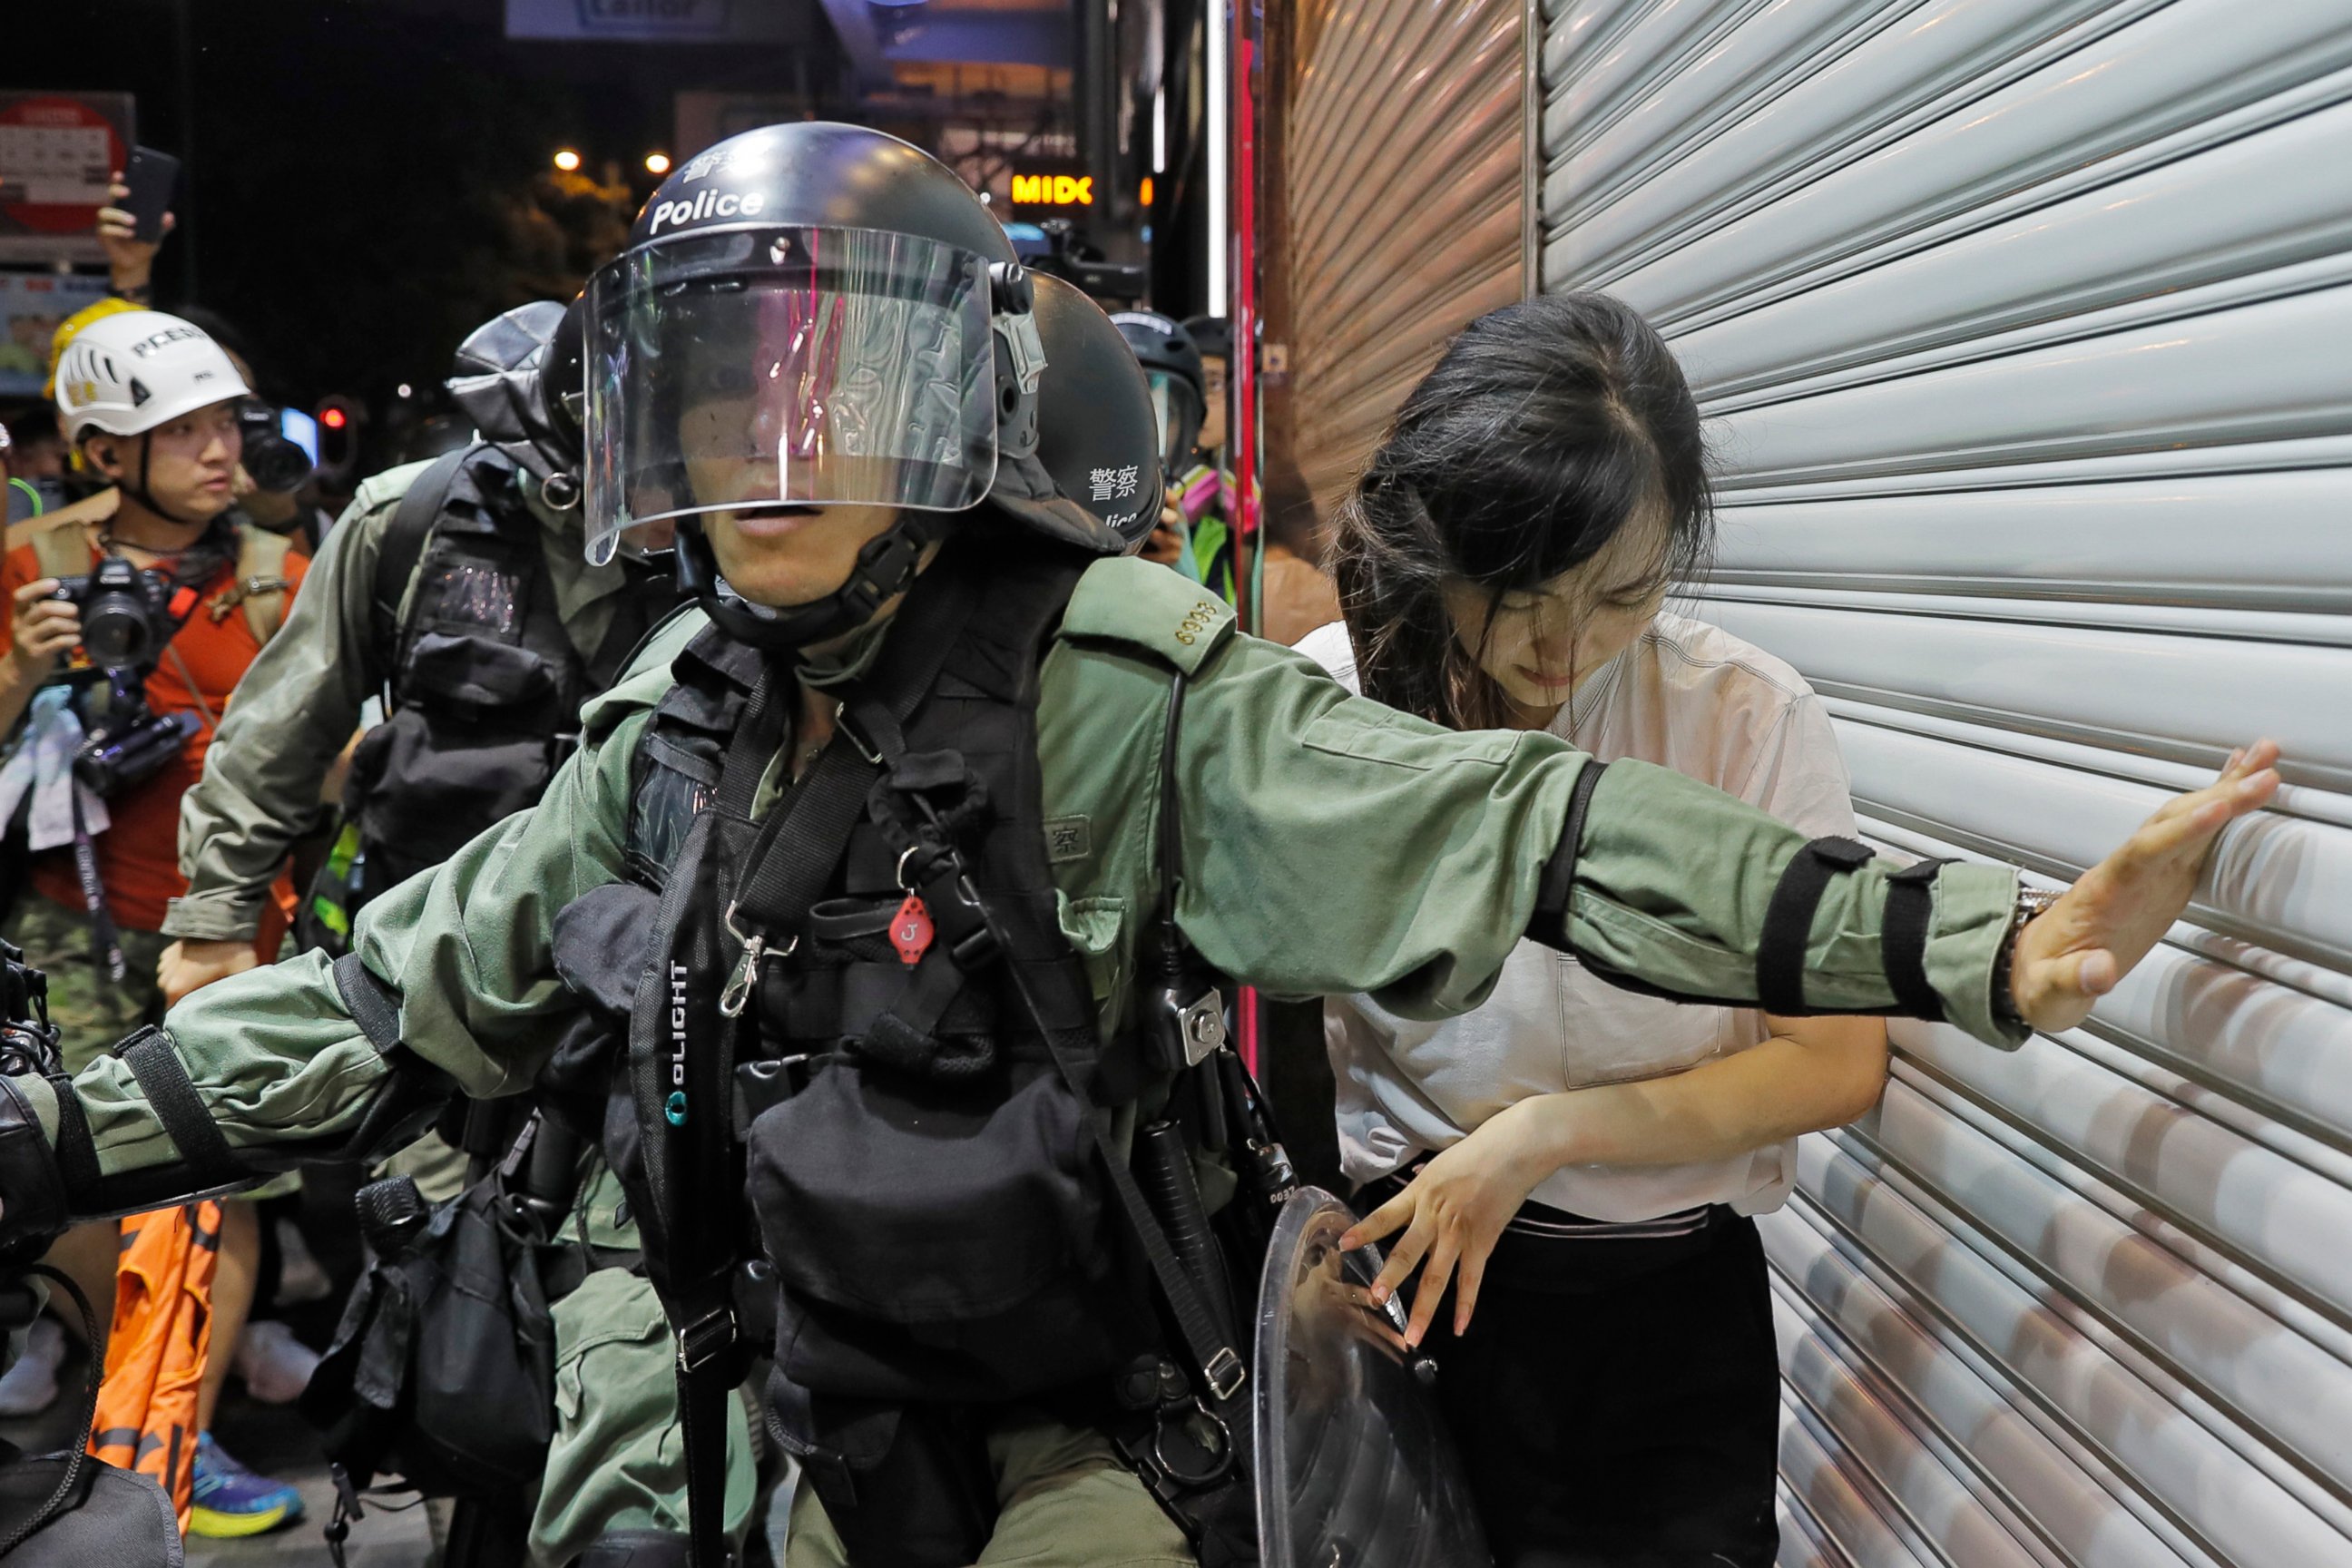 PHOTO: Police detain a girl during a confrontation in Hong Kong on Saturday, Aug. 10, 2019.